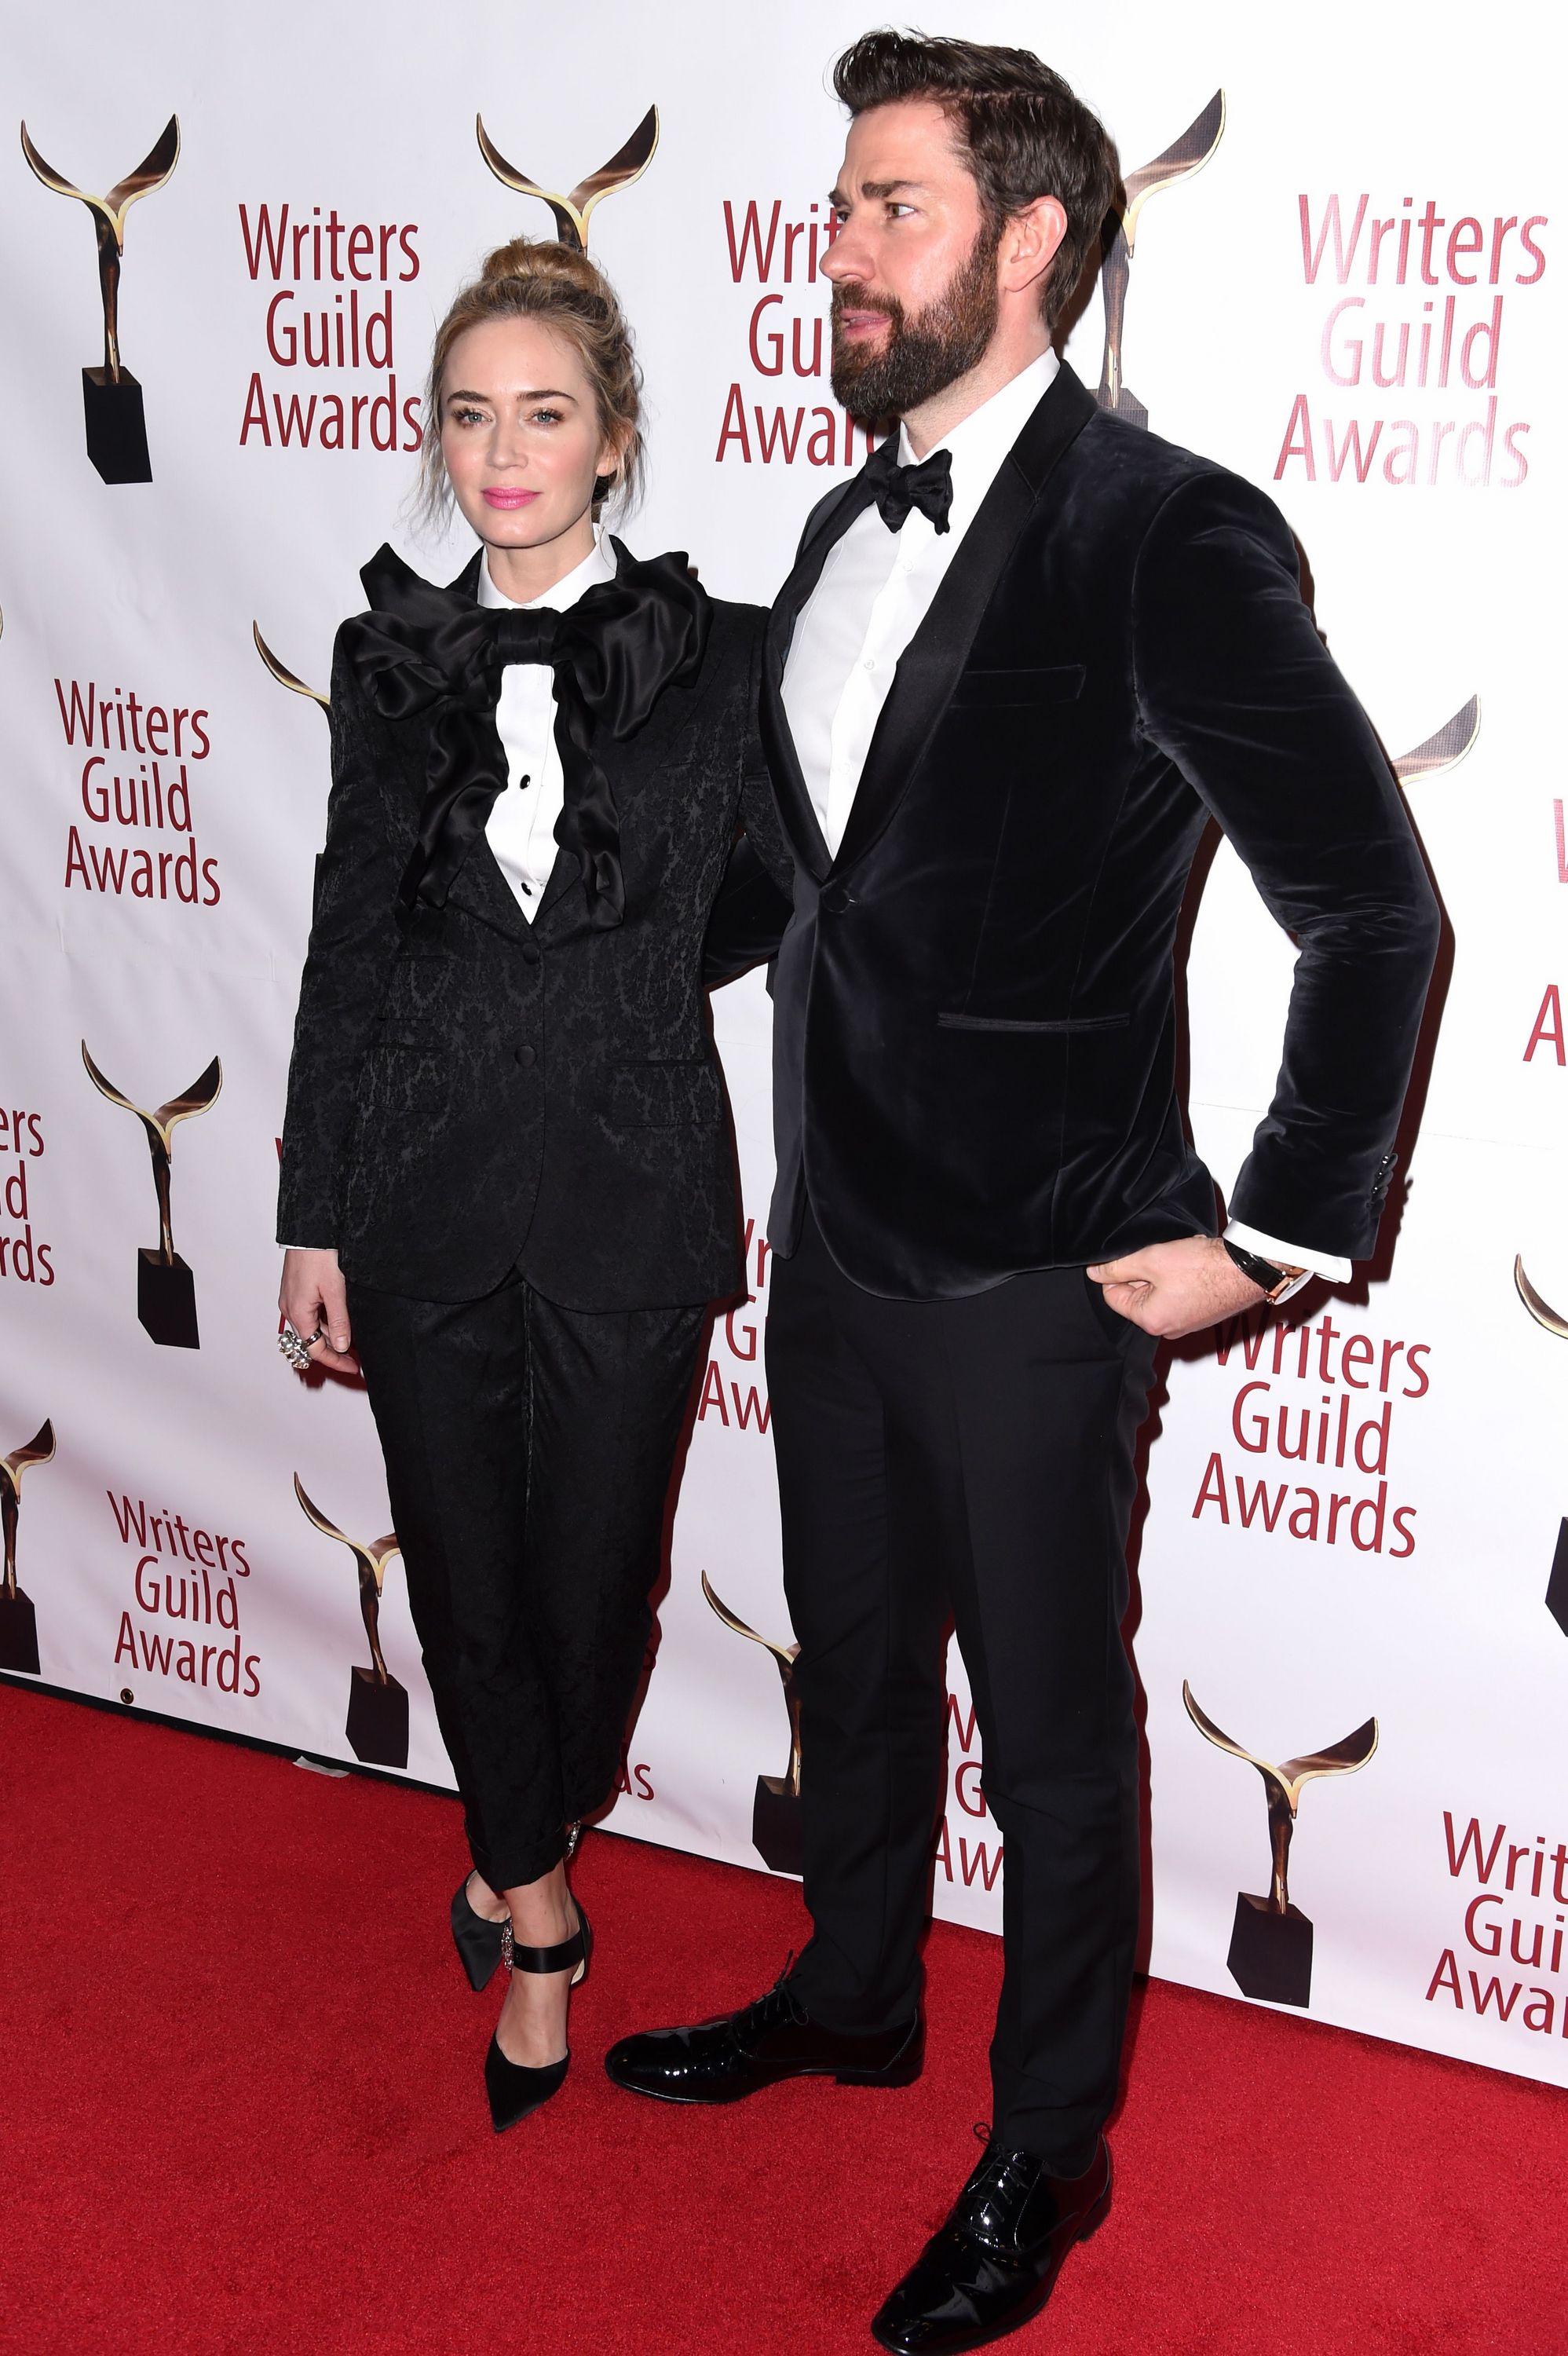 2019-02-17-71st-Annual-Writers-Guild-Awards-095.jpg